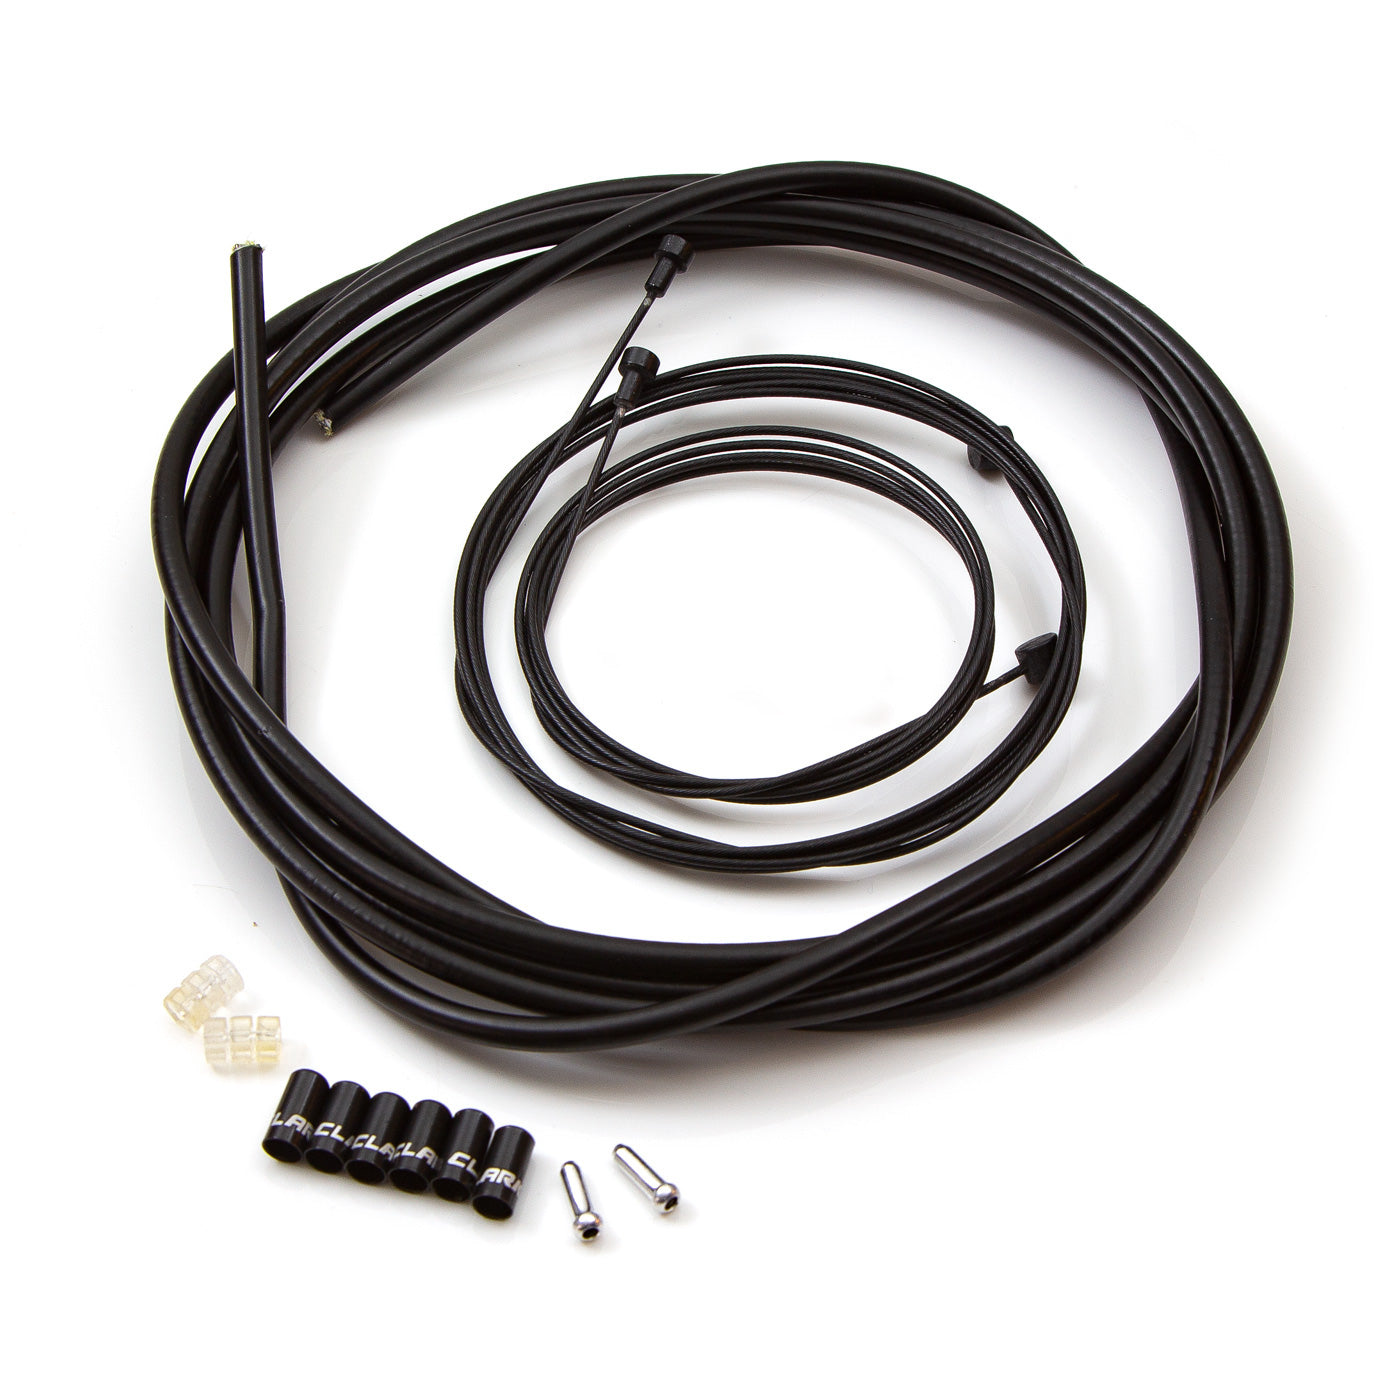 View Clarks Lightweight Alloy Housing Brake Cable Kit Black information